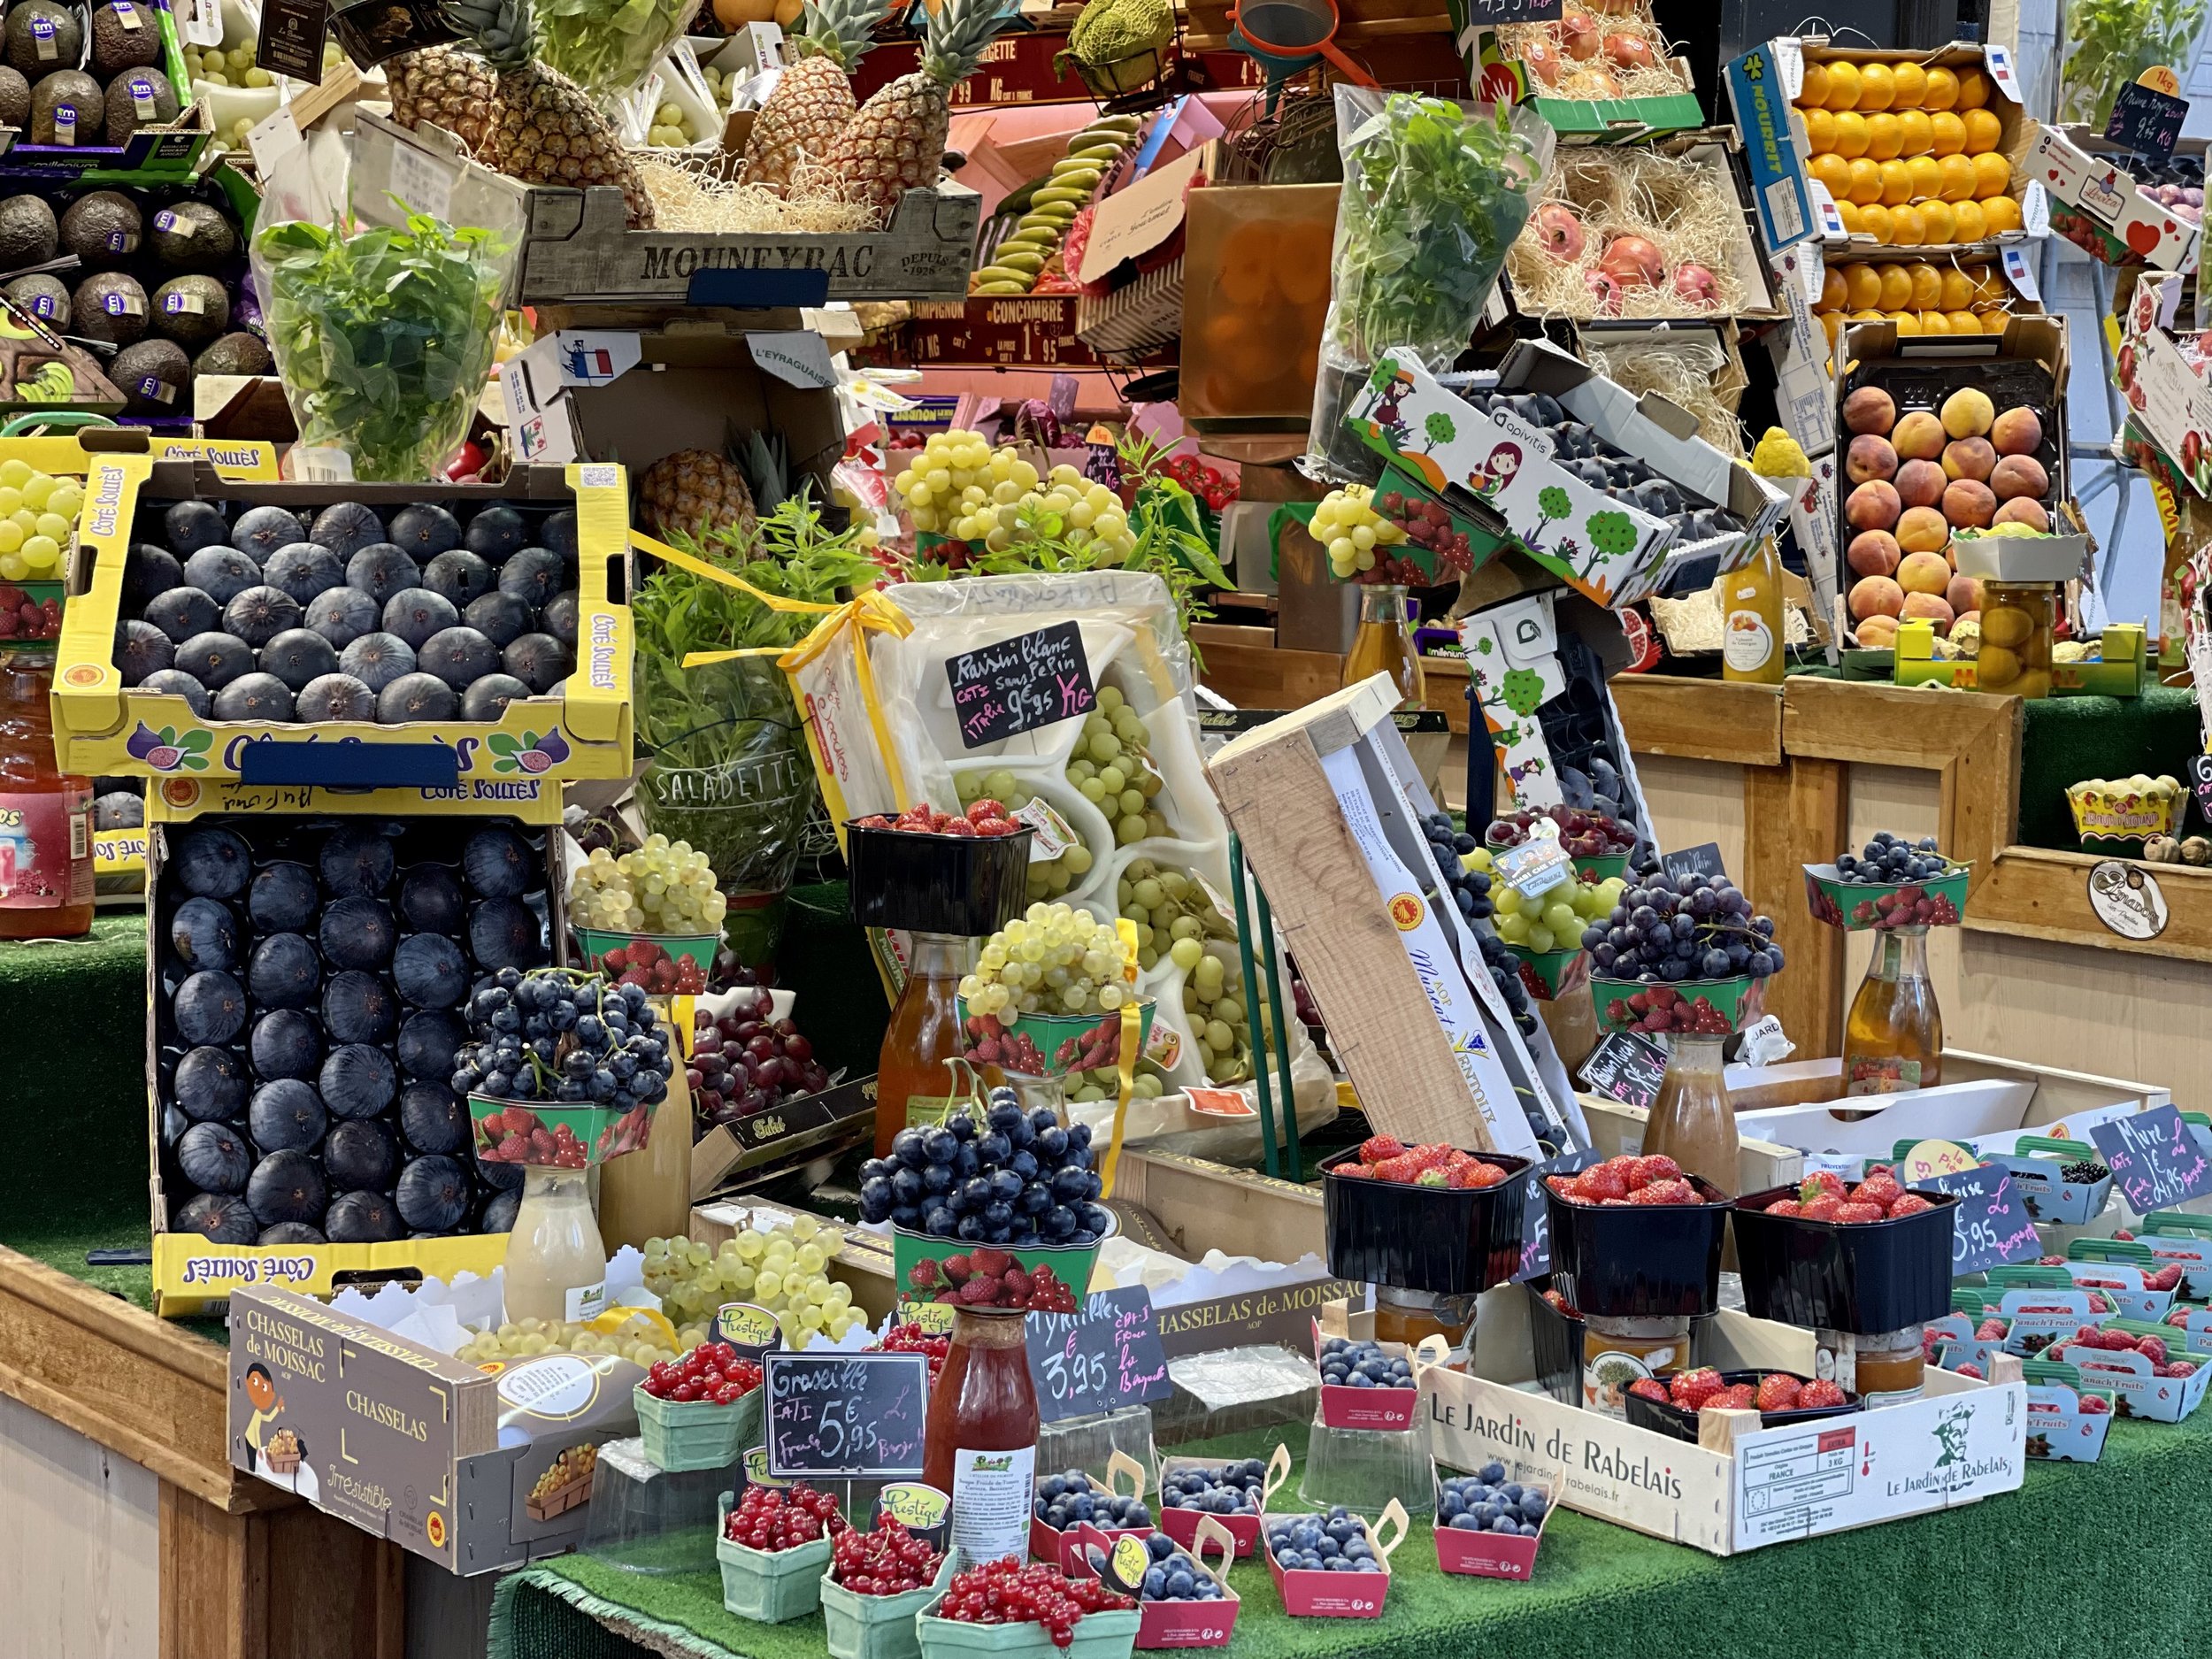 Artfully displayed produce on Rue des Martyr, the best food street in Paris.